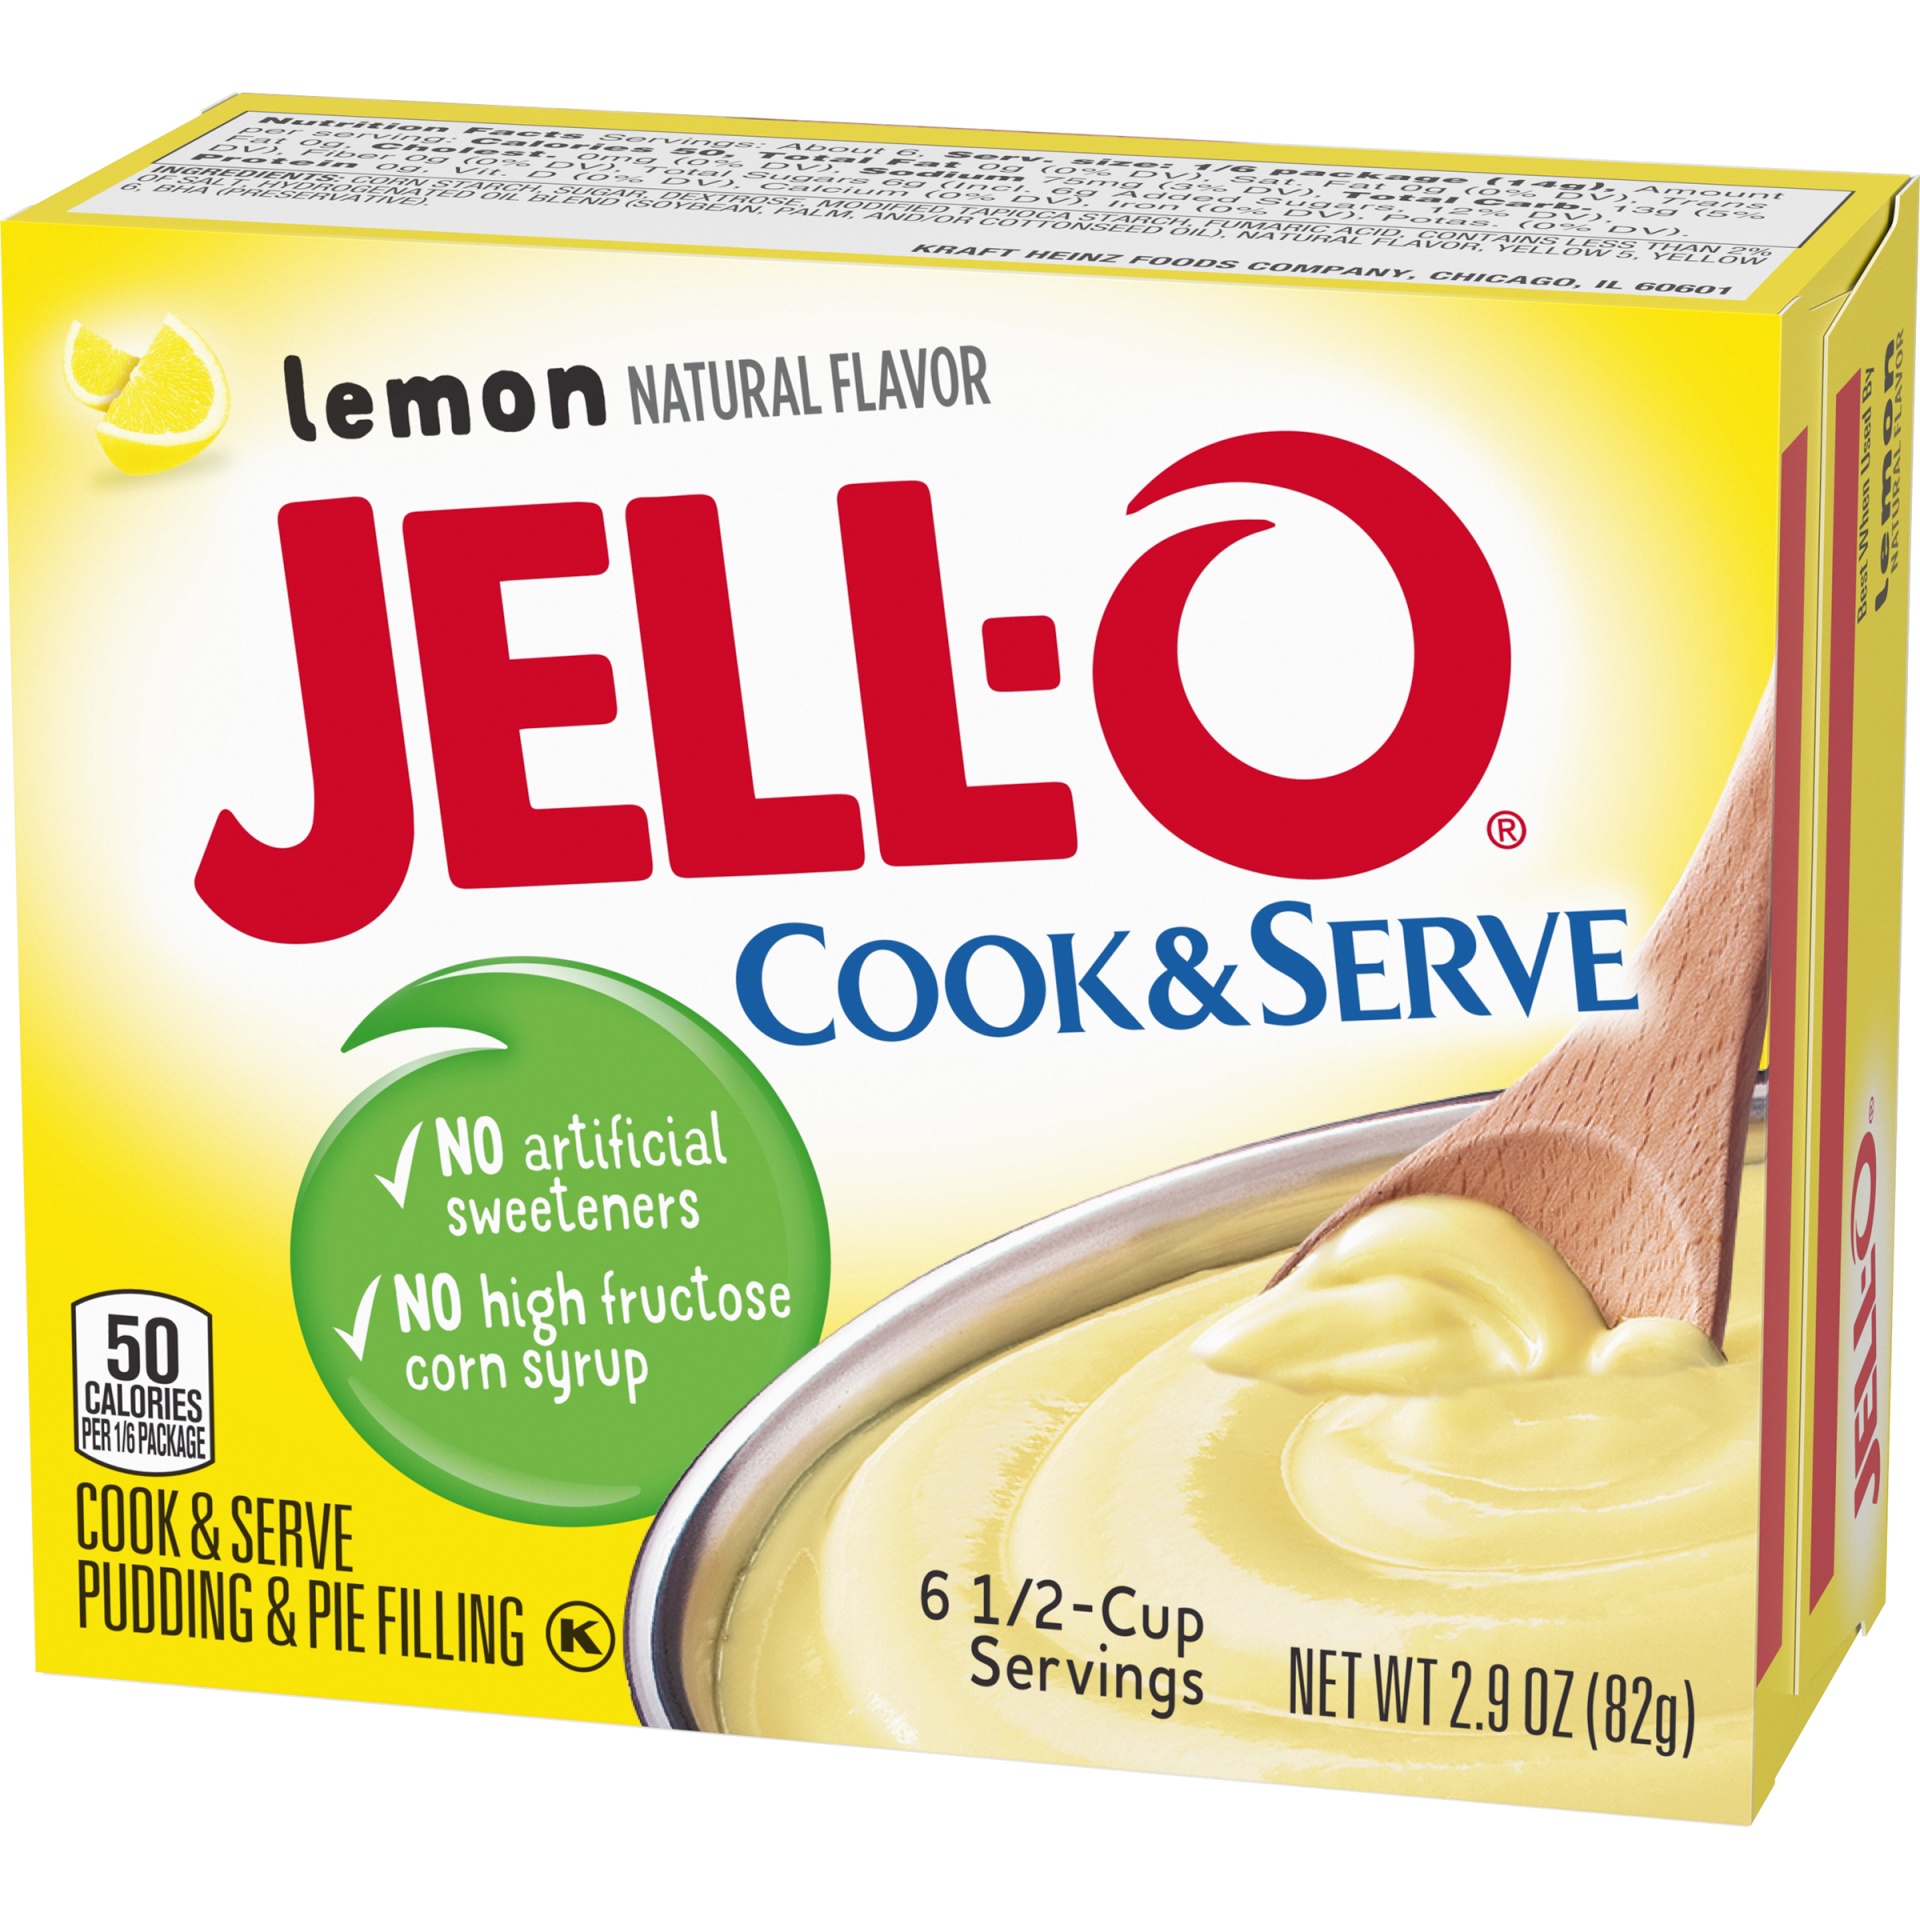 slide 7 of 10, Jell-O Cook & Serve Lemon Naturally Flavored Pudding & Pie Filling Mix, 2.9 oz Box, 